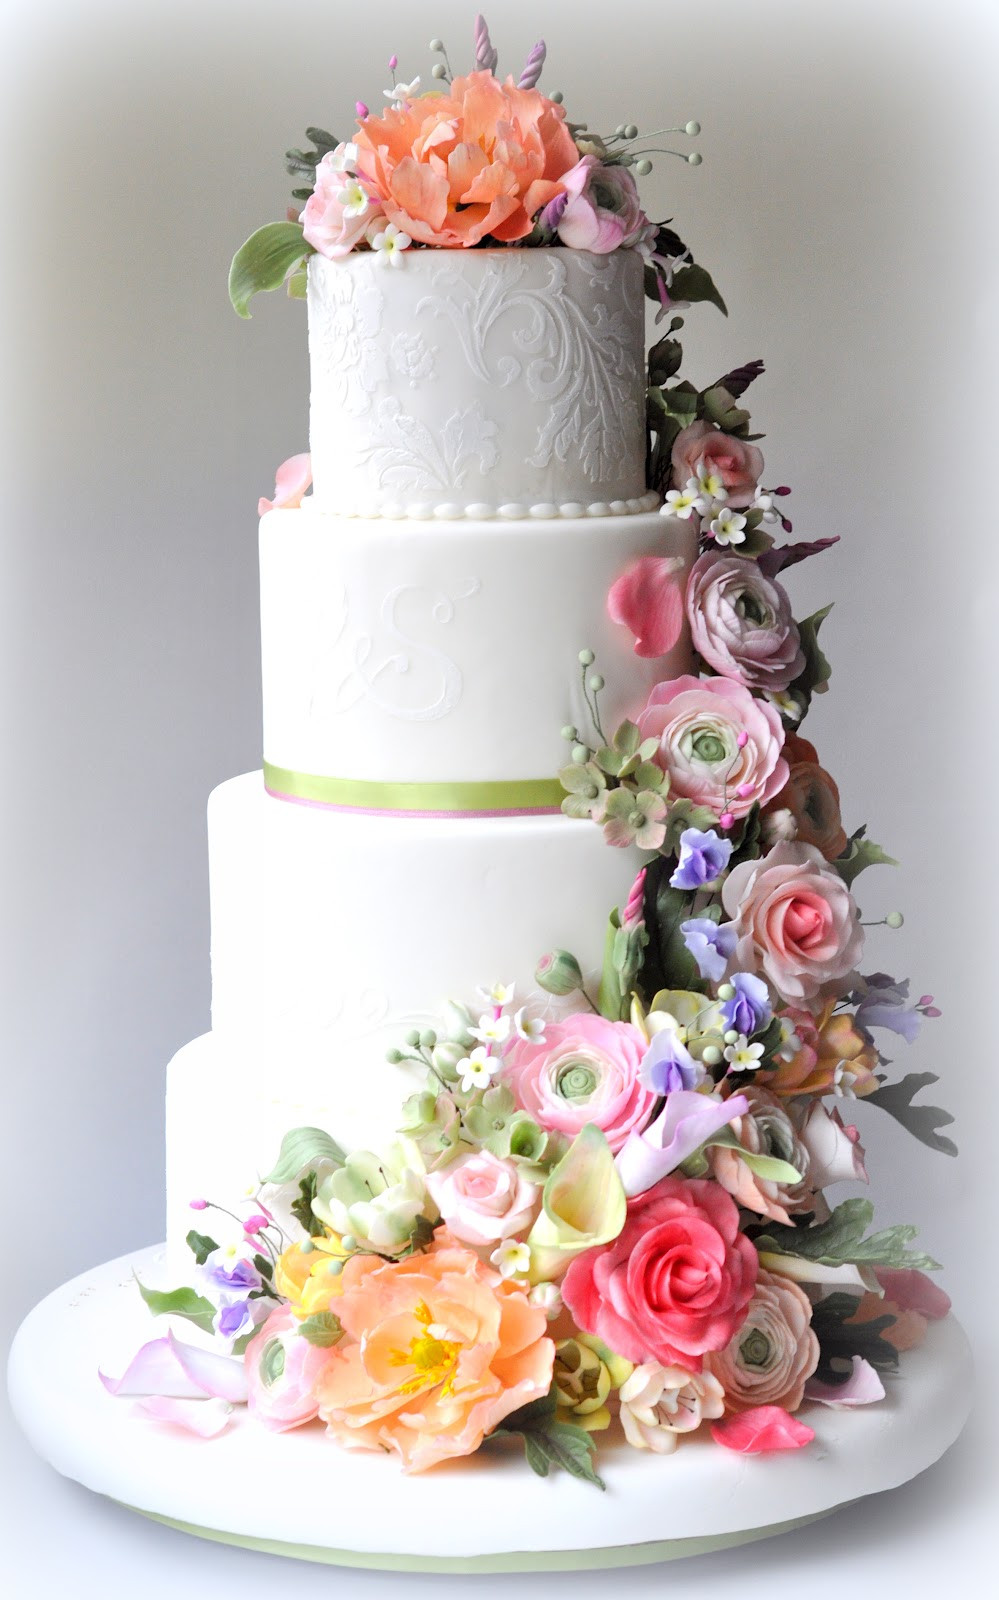 Wedding Cakes Flowers 20 Of the Best Ideas for 7 Gorgeous Reasons to Fall In Love with Spring Weddings